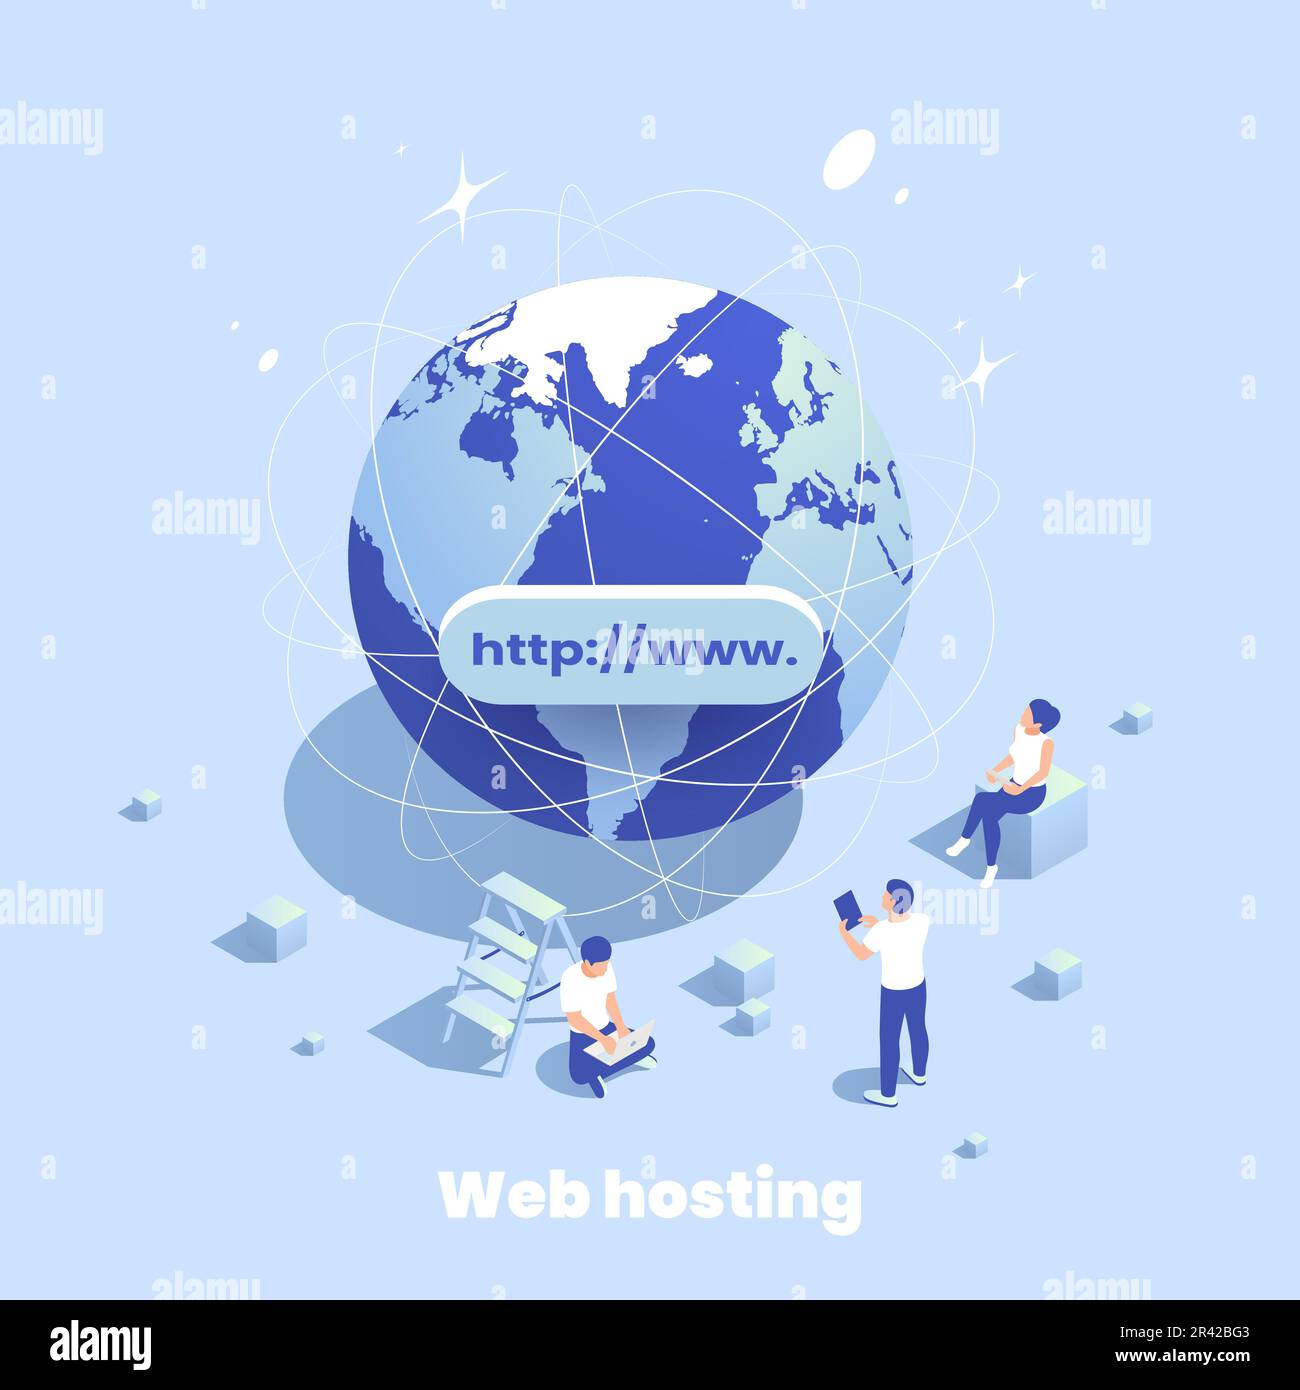 Web hosting icons isometric composition of editable text and image of earth globe with human characters vector illustration Stock Vector